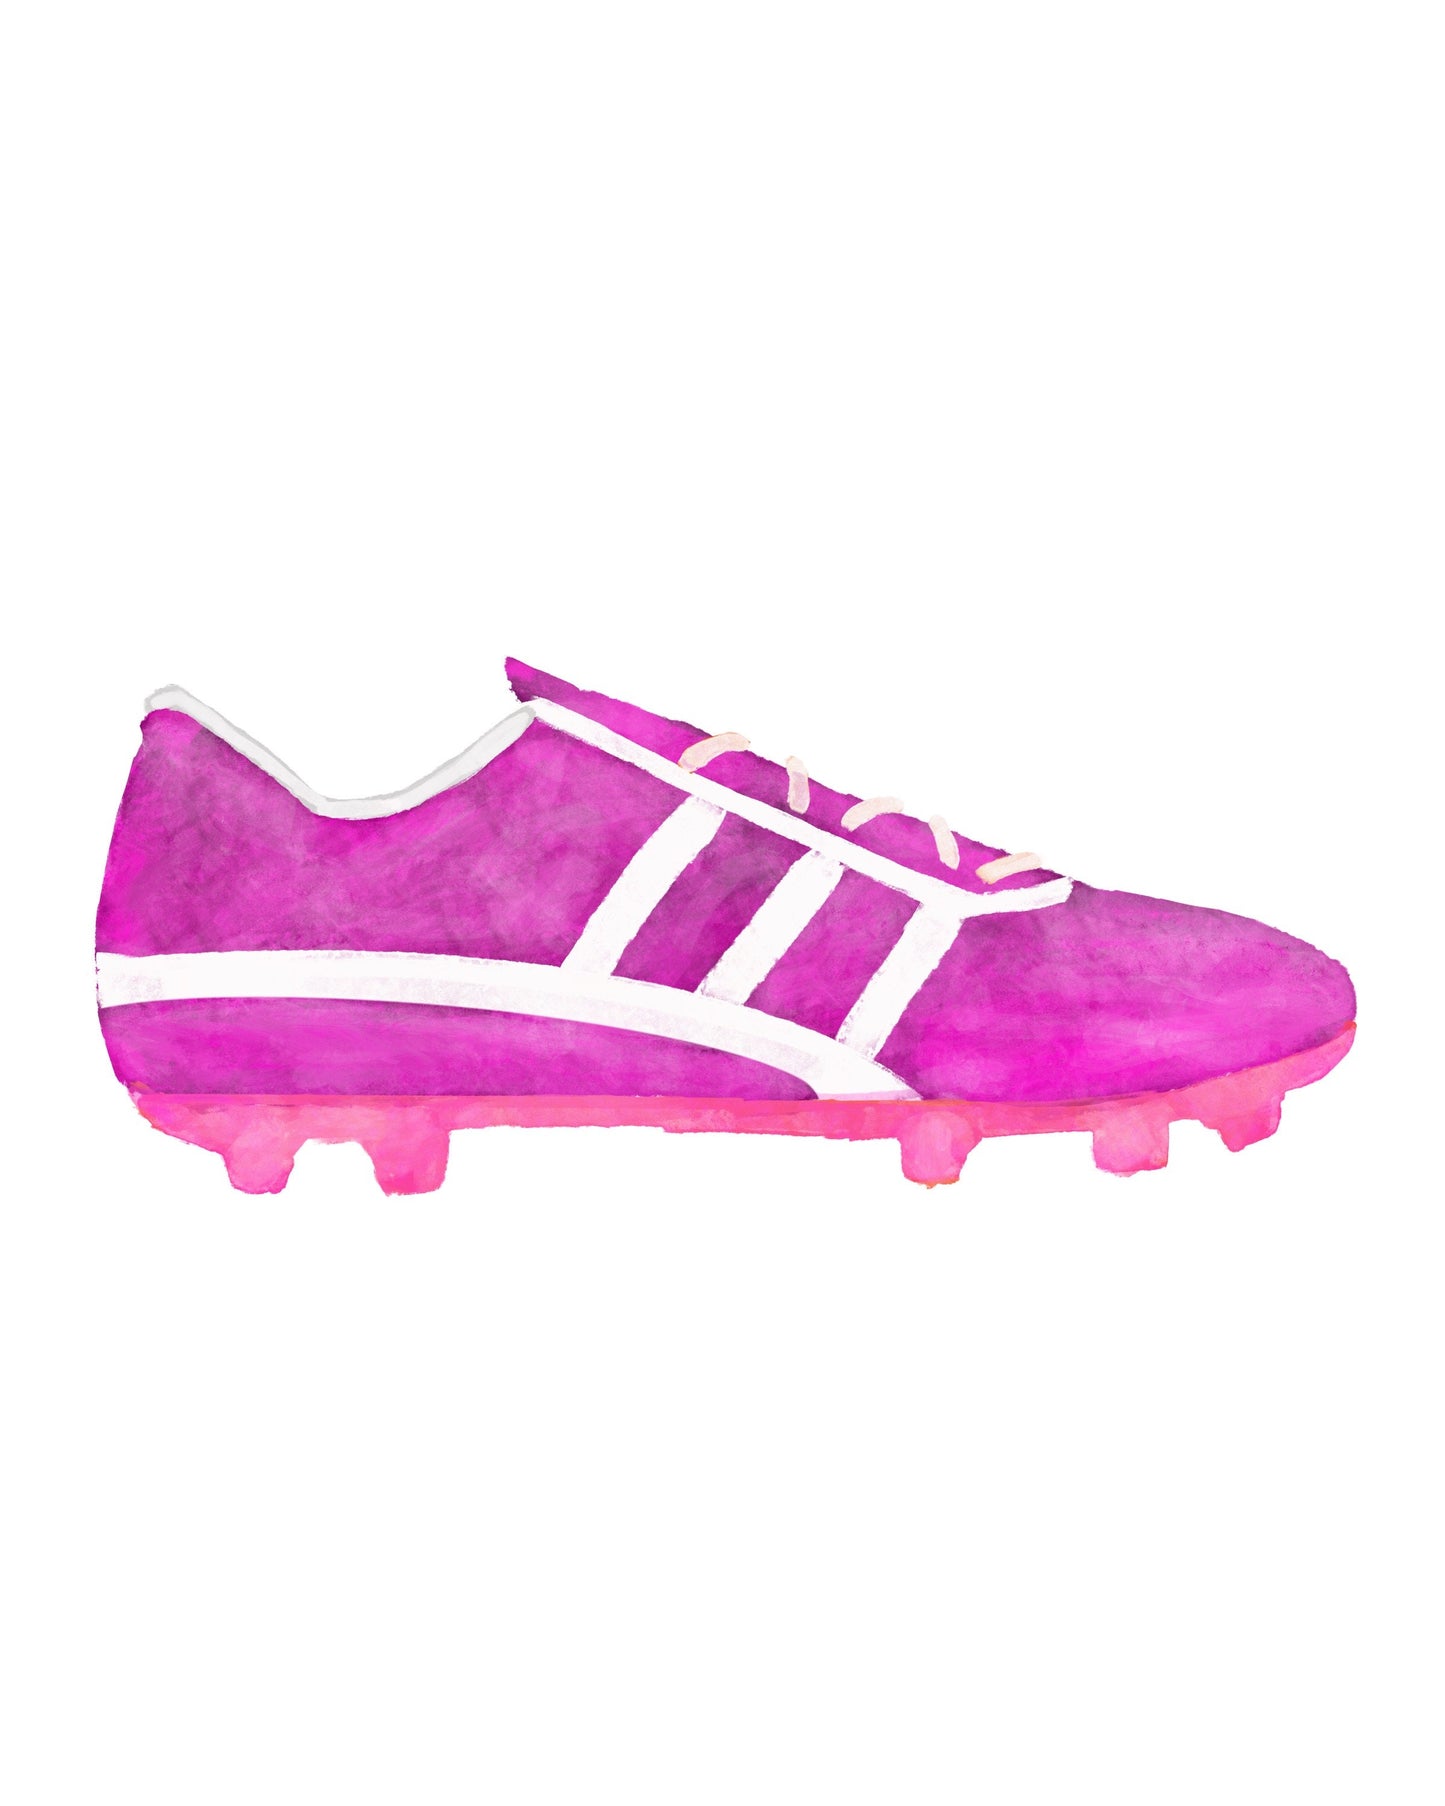 Pink Soccer Shoes Print, Sport Painting, Girls Room Wall Art, Gift for Kids, Soccer Cleats, Nursery Decor, Sports Lover Drawing